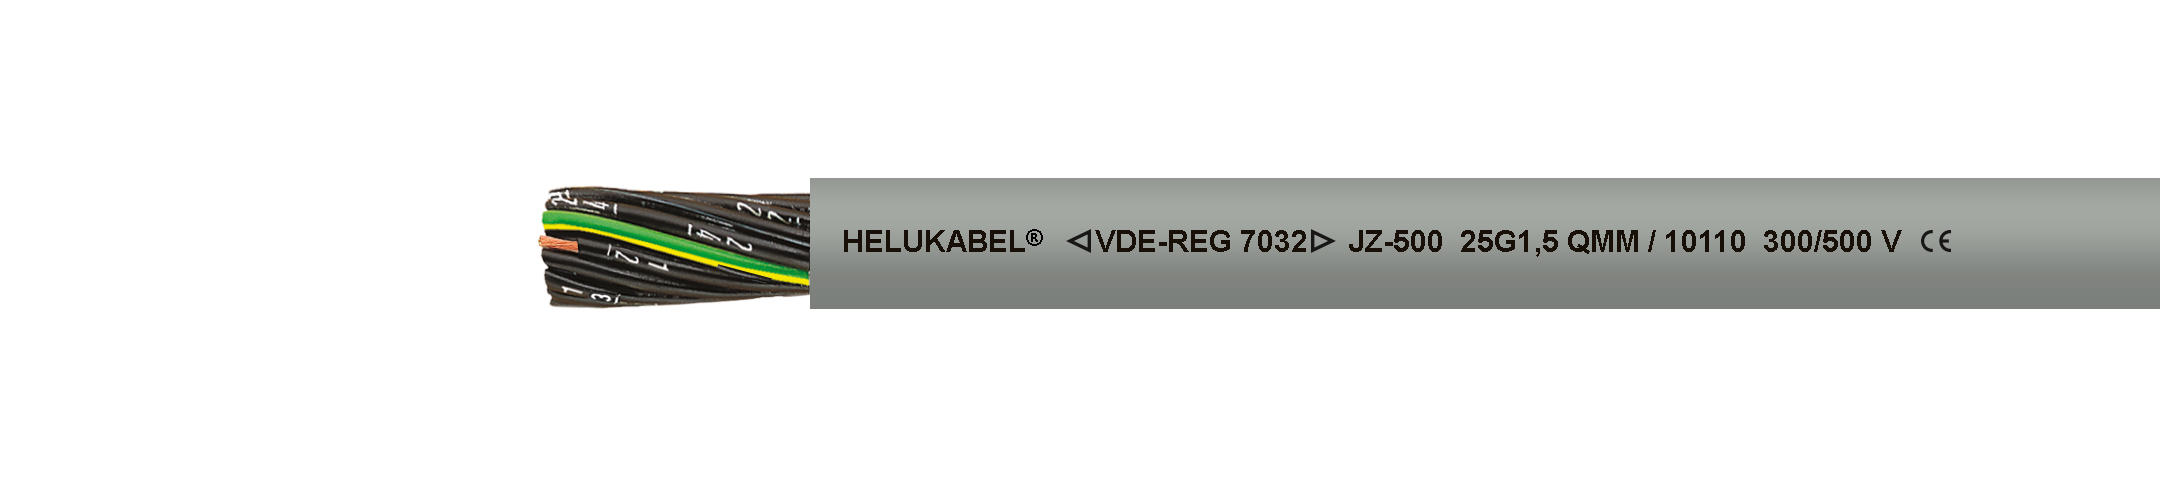 Cable Helukabel: JZ 500